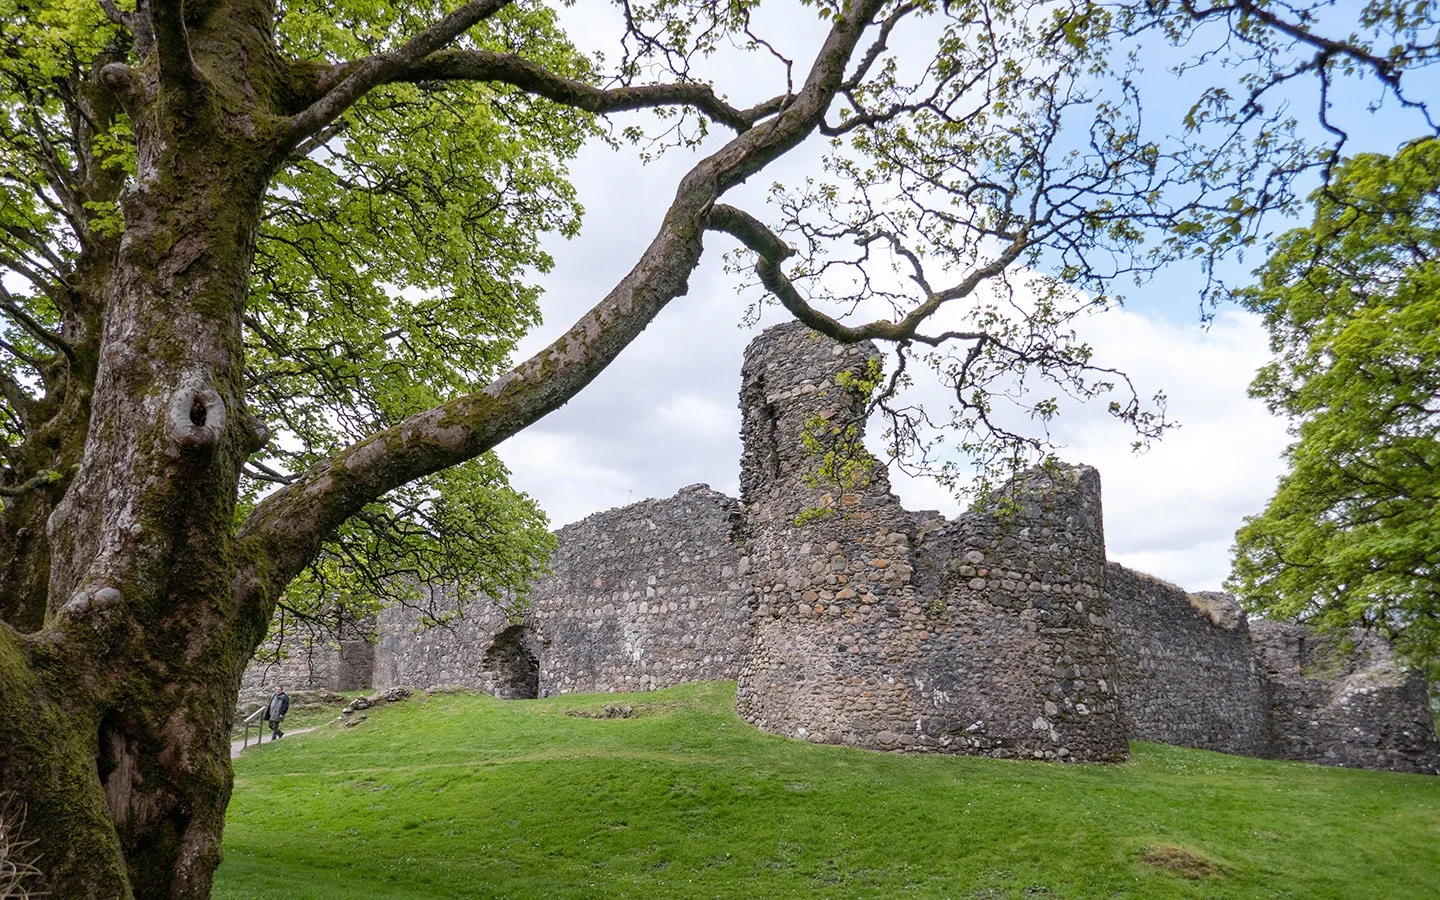 The ruins of Old Inverlochy Castle near Fort William in Scotland